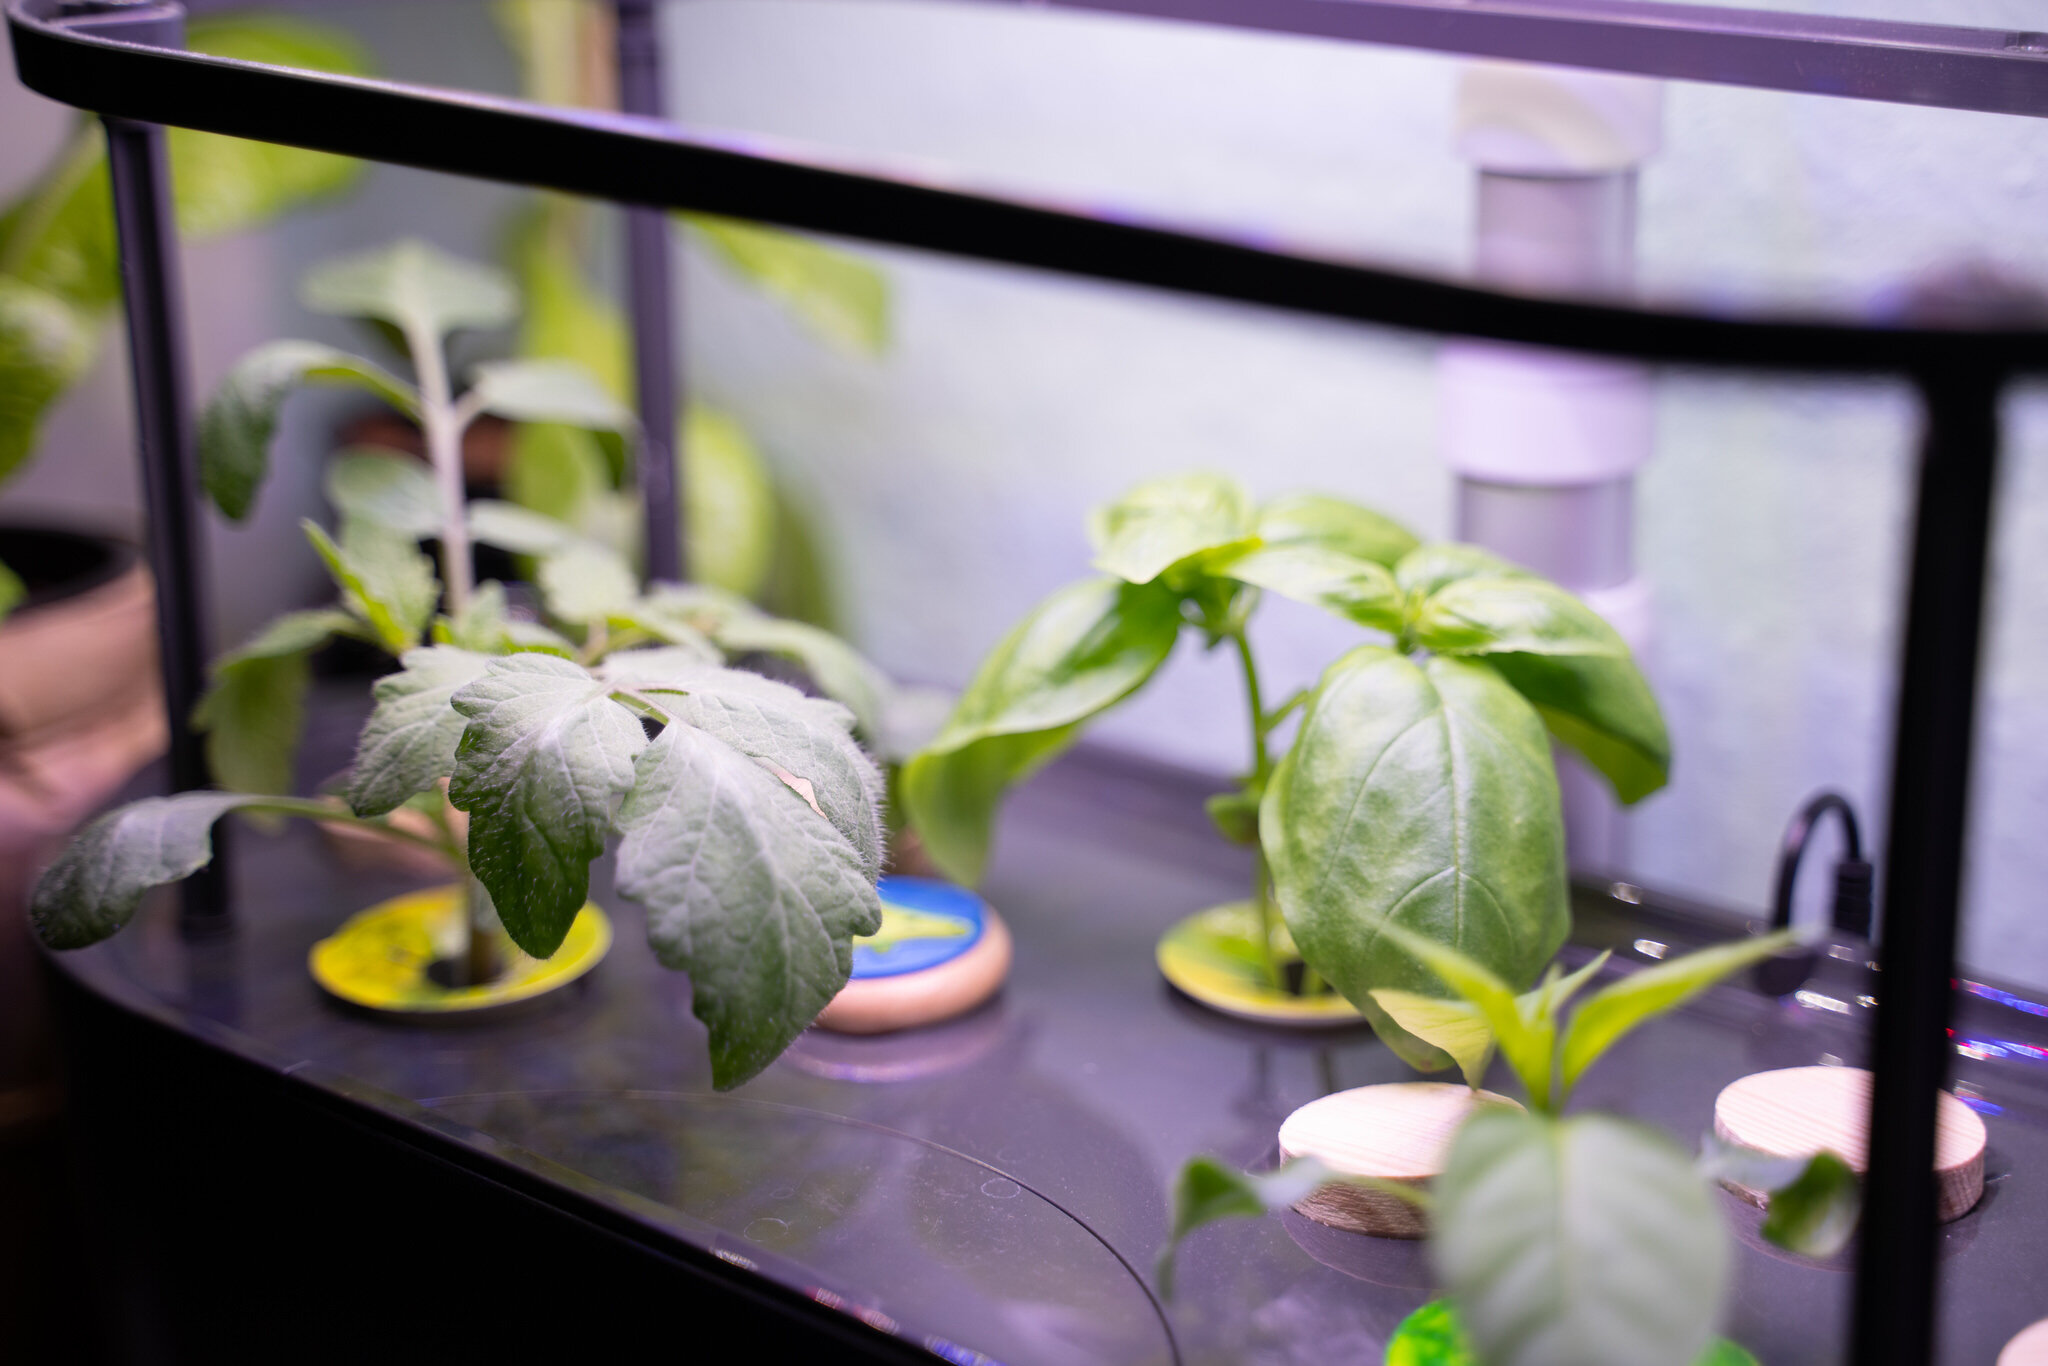 Growing Vegetables Indoors Without Soil nor Sun - Hydroponic Systems 112.JPG